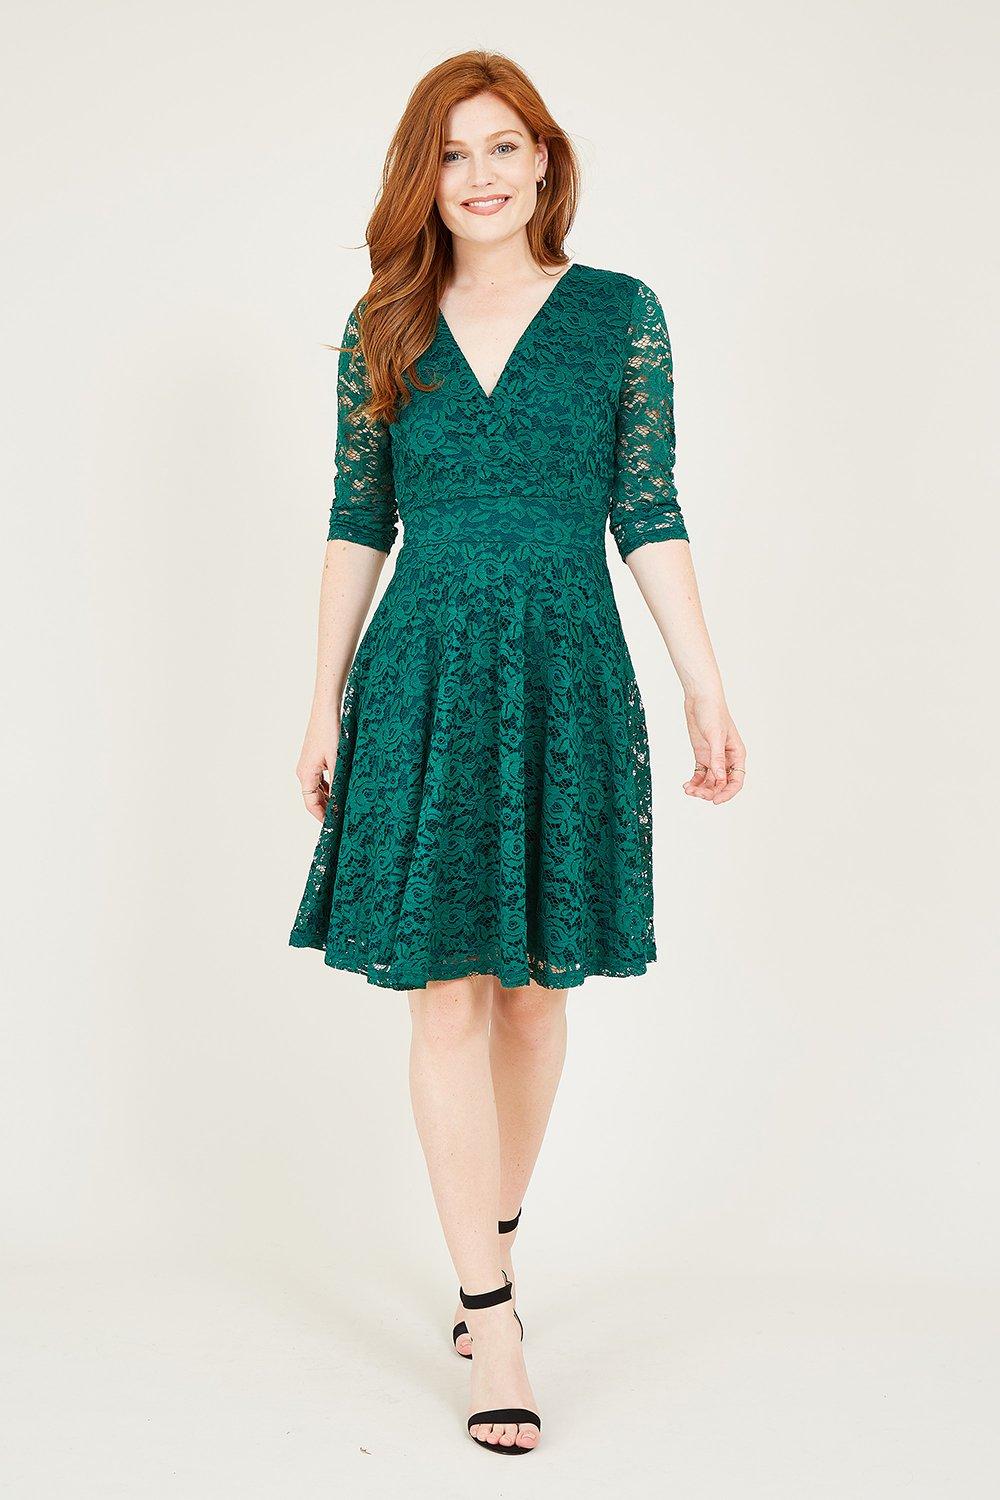 Green Delicate Lace Long Sleeve 'Kenna' Dress